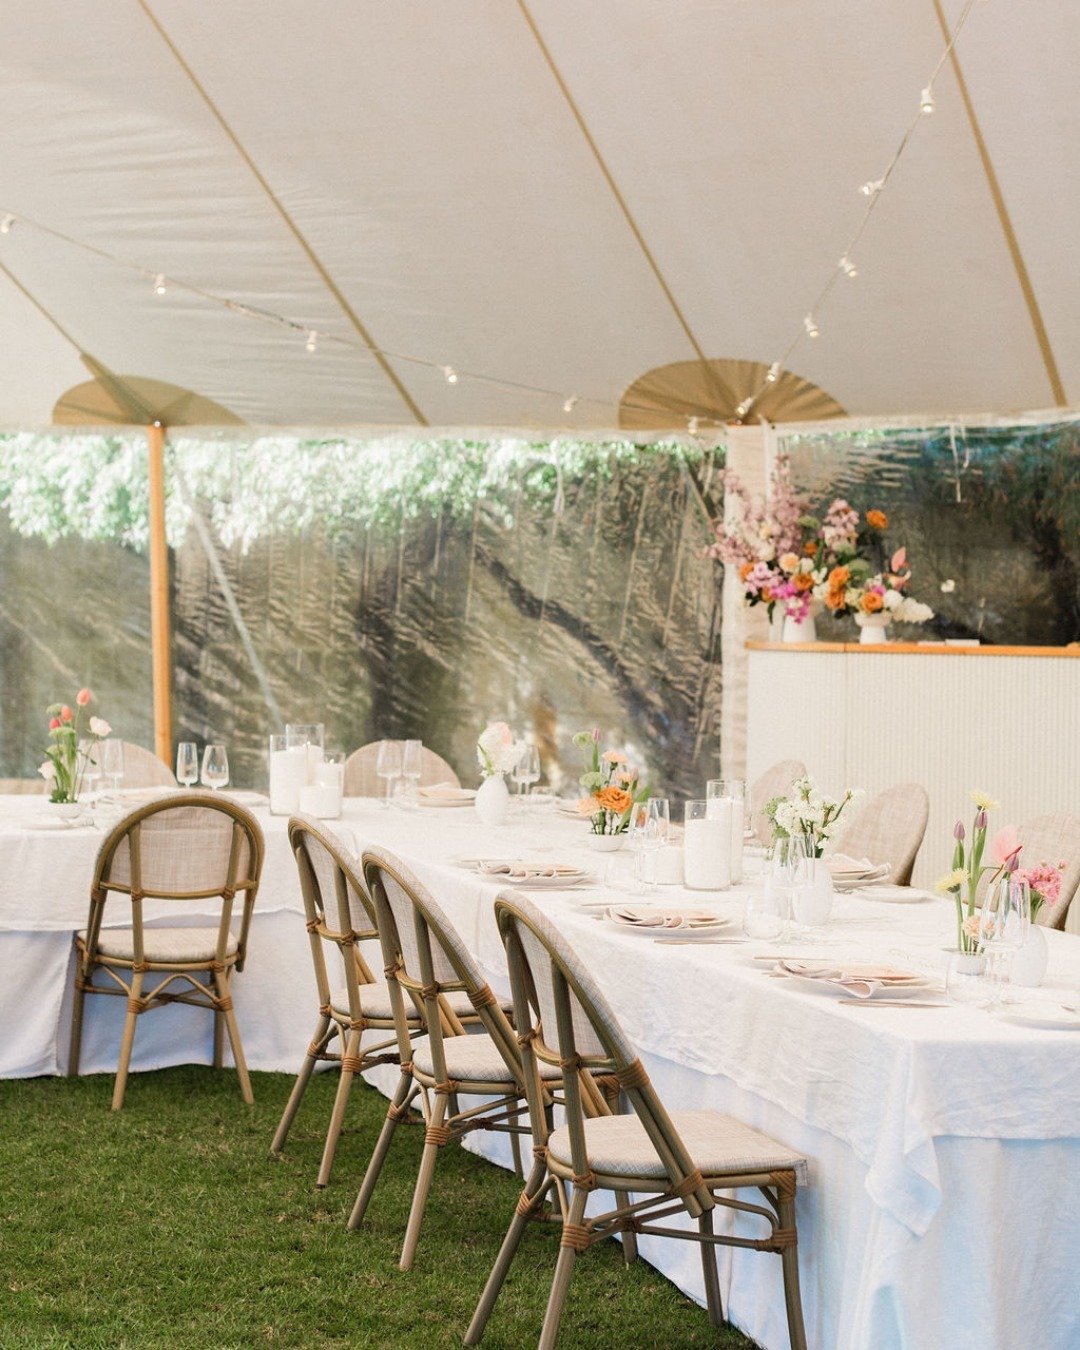 We&rsquo;re ready when you are&hellip; 🥂
ㅤ
We loved creating this sit down reception at last year&rsquo;s Swan Valley Wedding Open Day.
ㅤ
A reminder that if you&rsquo;re hoping to secure your Sperry Tent or furniture hire for the 2024/2025 summer we